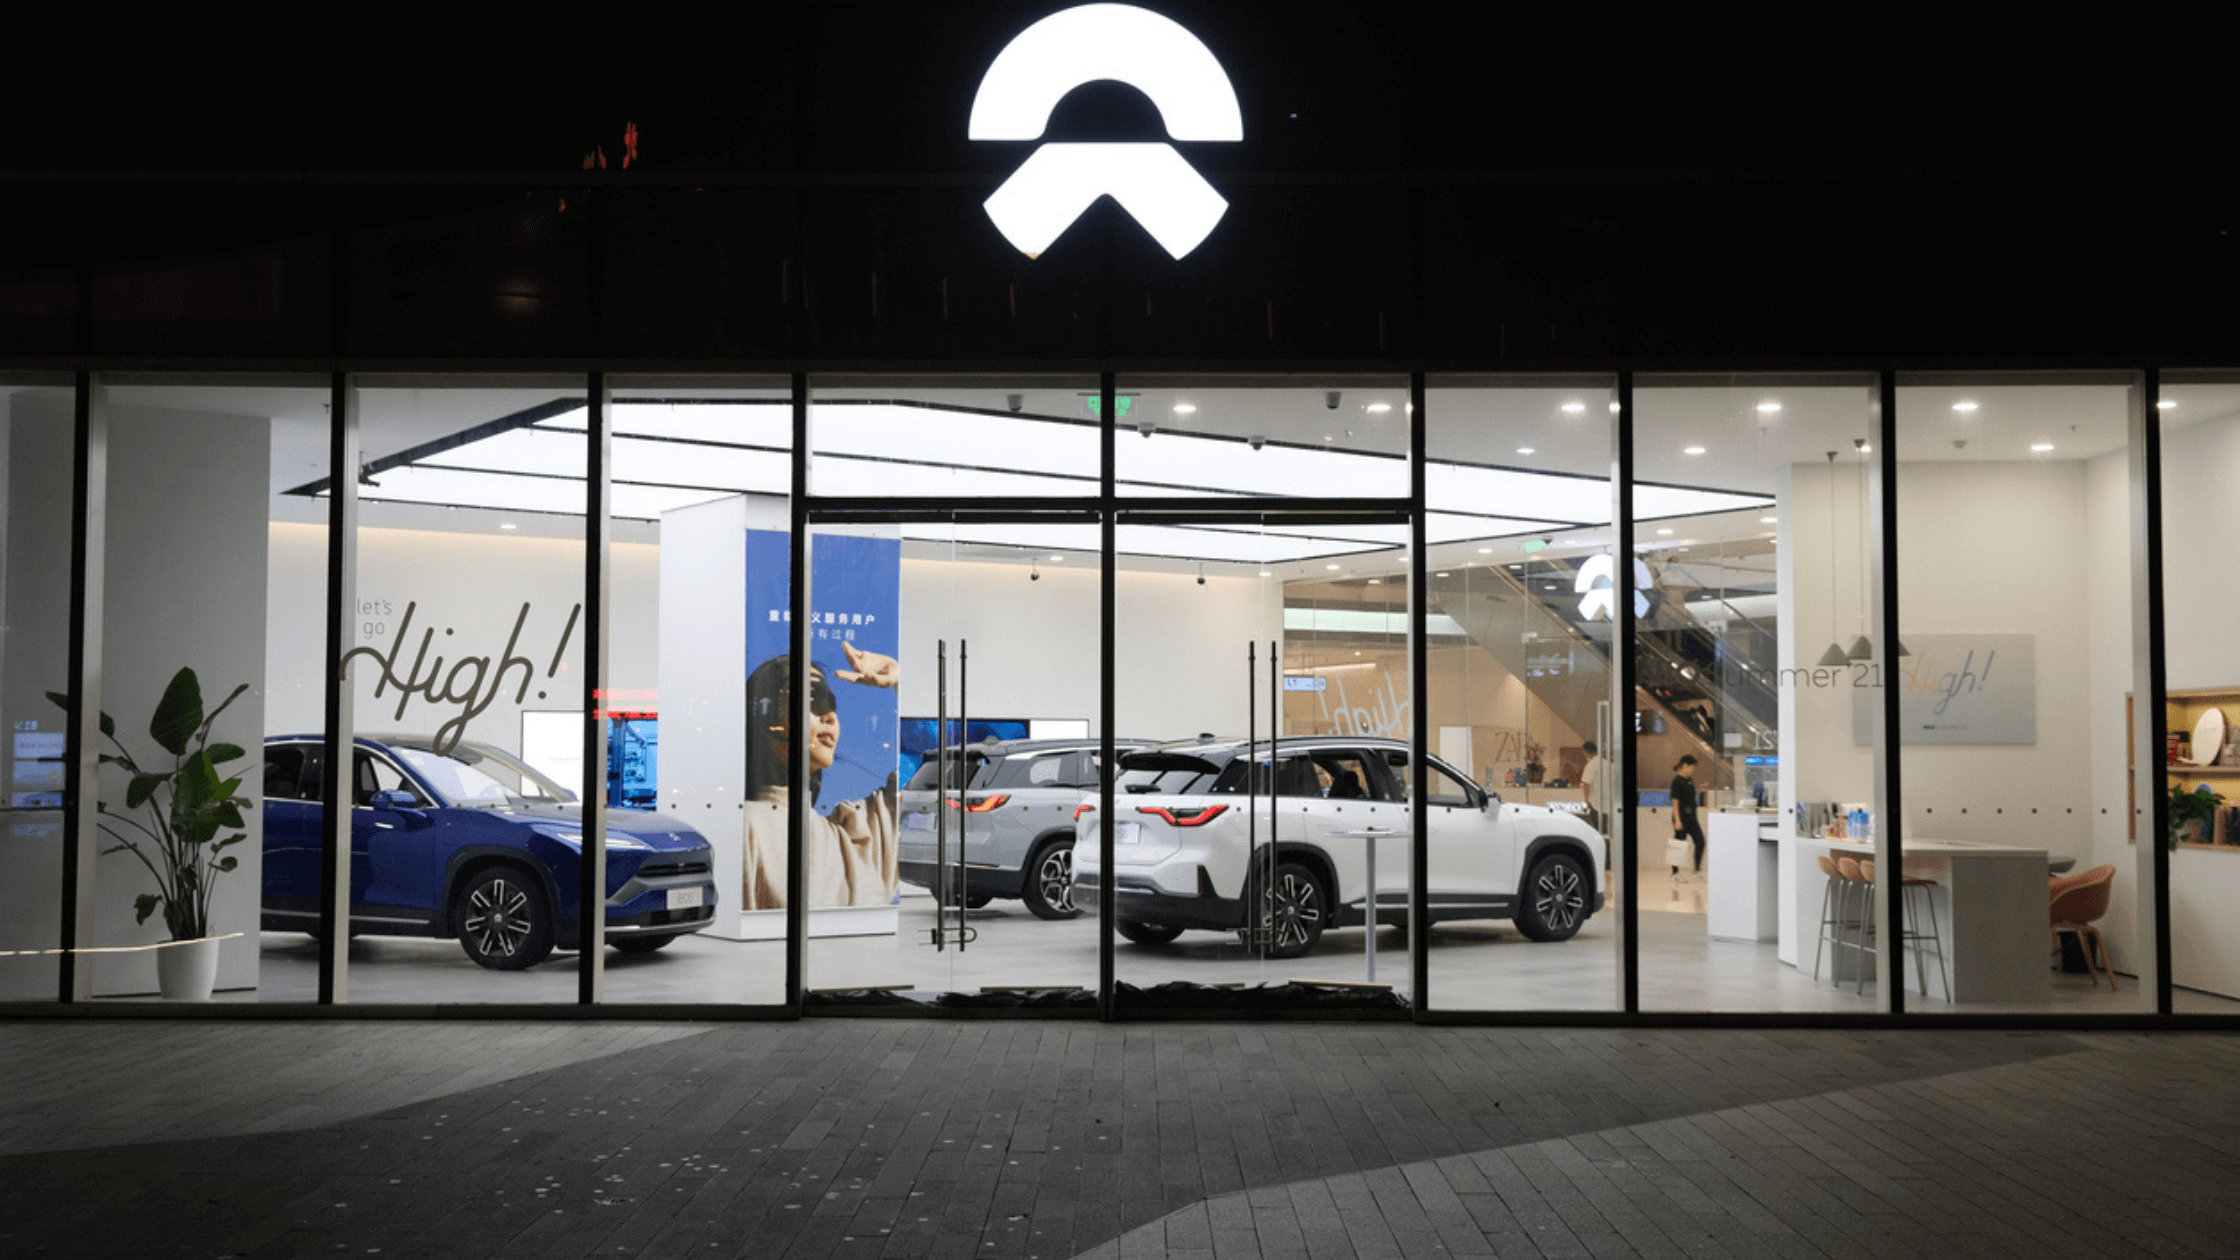 NIO Stock: What to Focus on in Its Path Towards Profitability